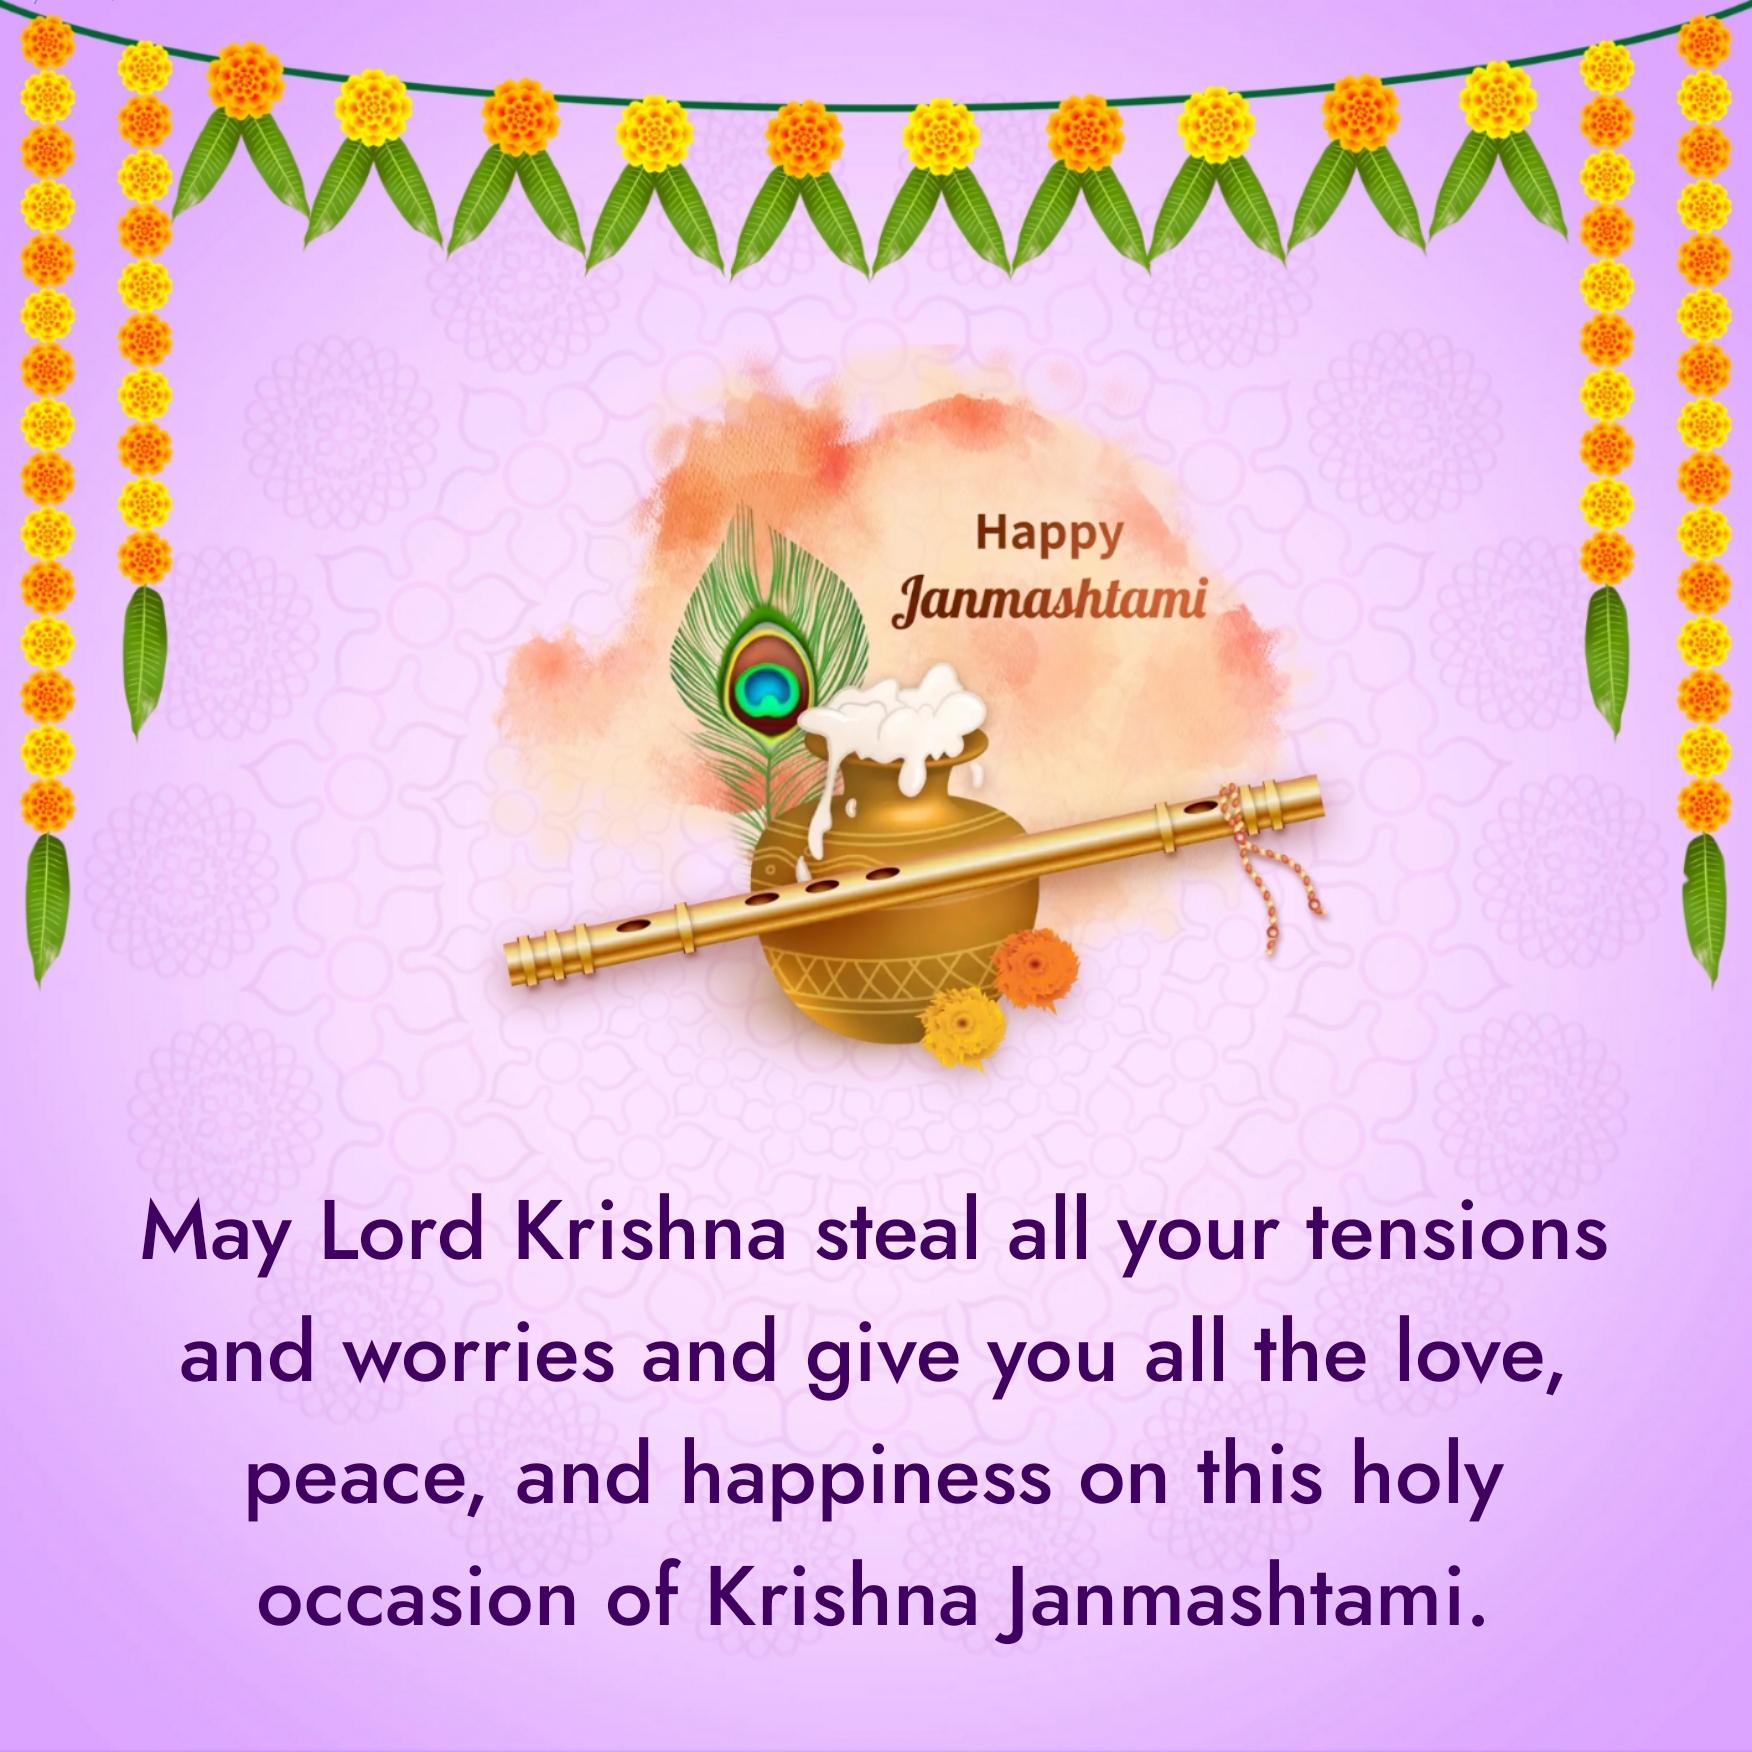 May Lord Krishna steal all your tensions and worries